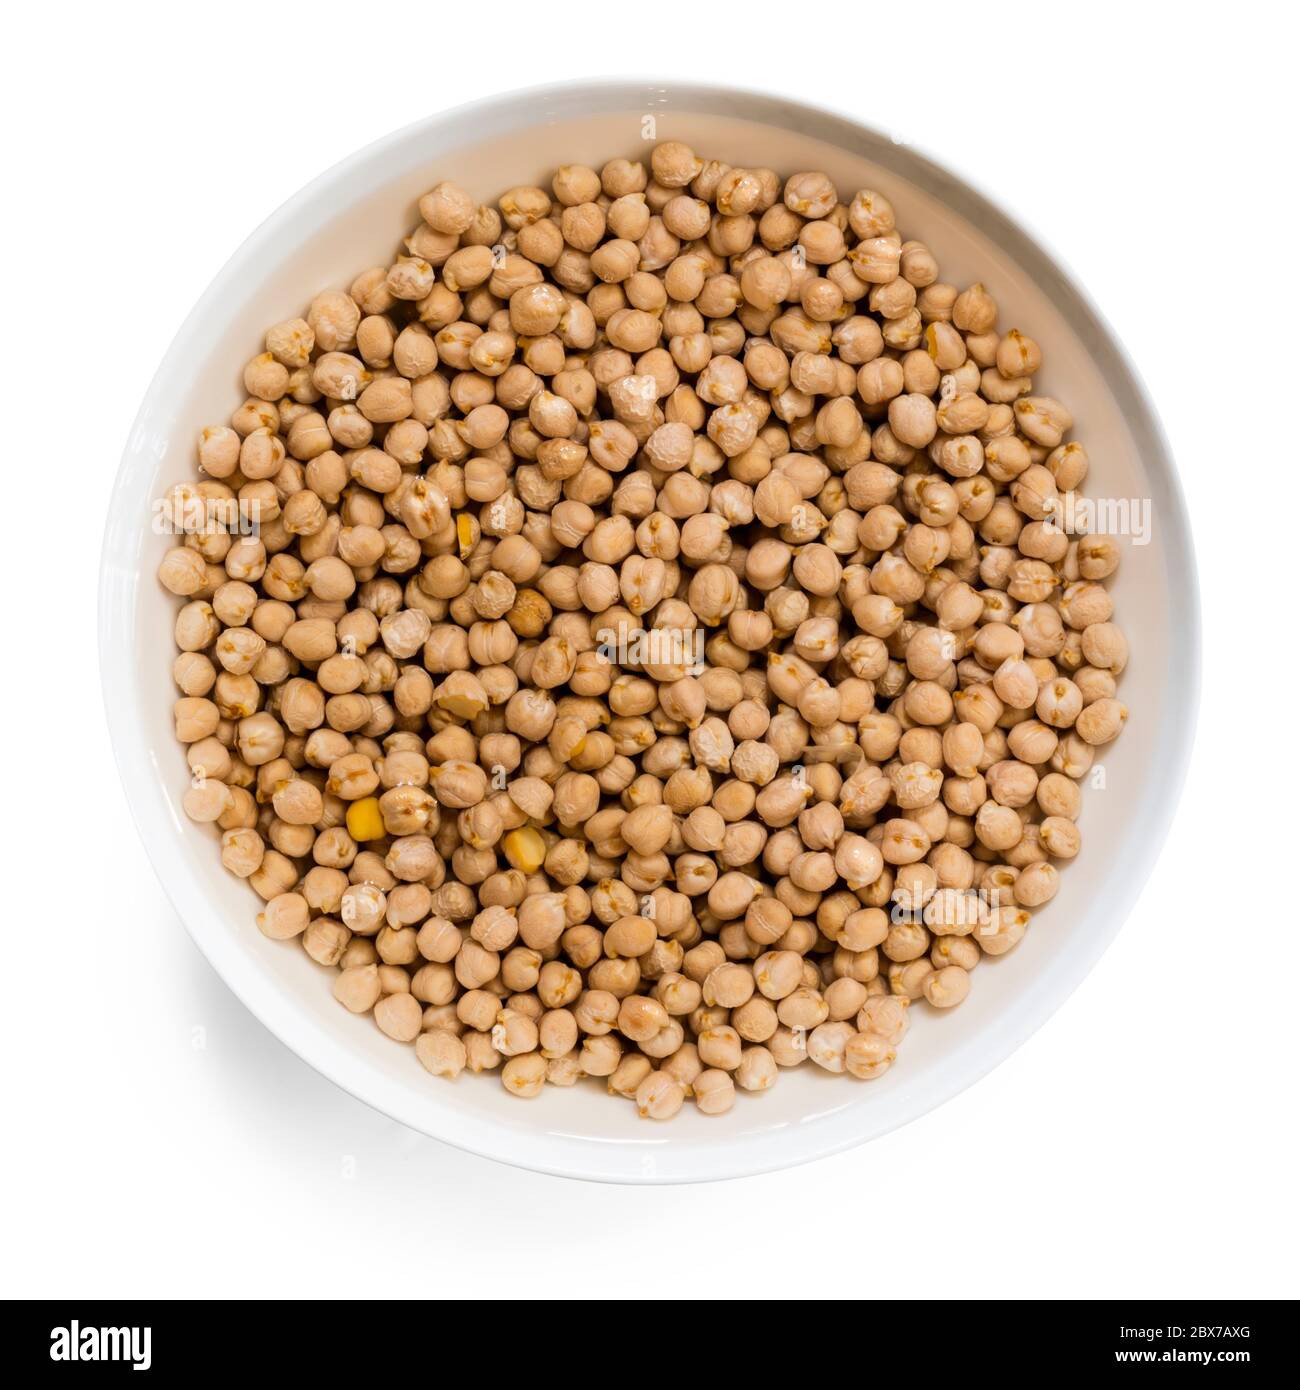 Uncooked chickpeas soaking in water, top view, isolated. Stock Photo